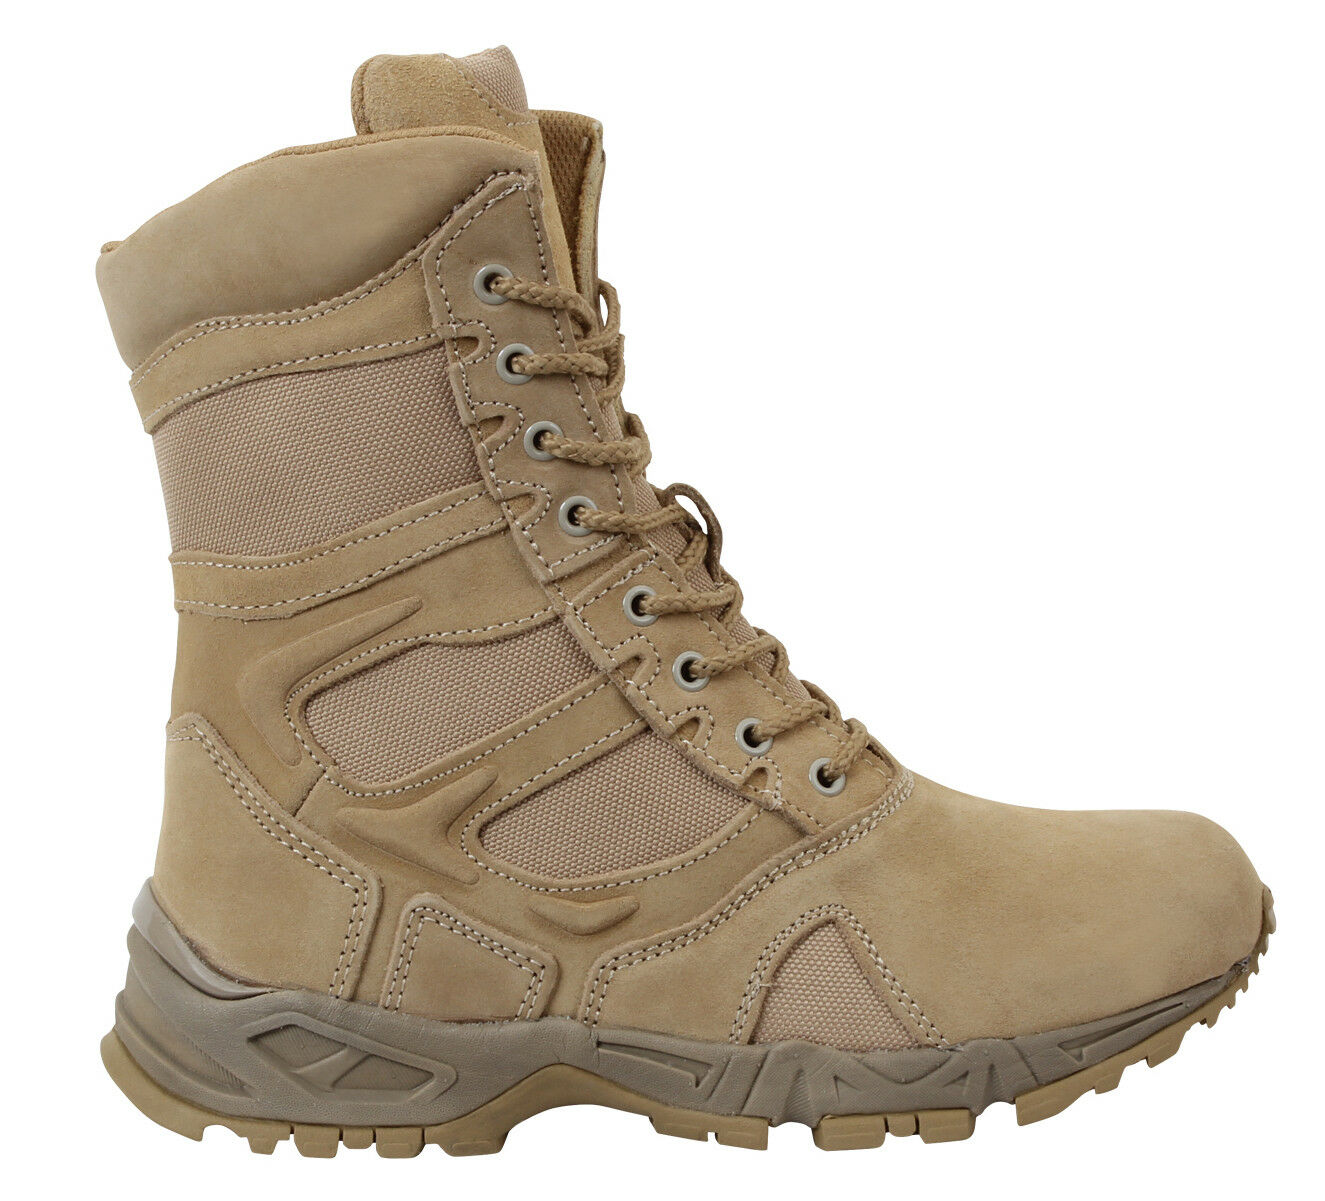 Rothco Forced Entry Deployment Boots With Side Zipper - 8 Inch